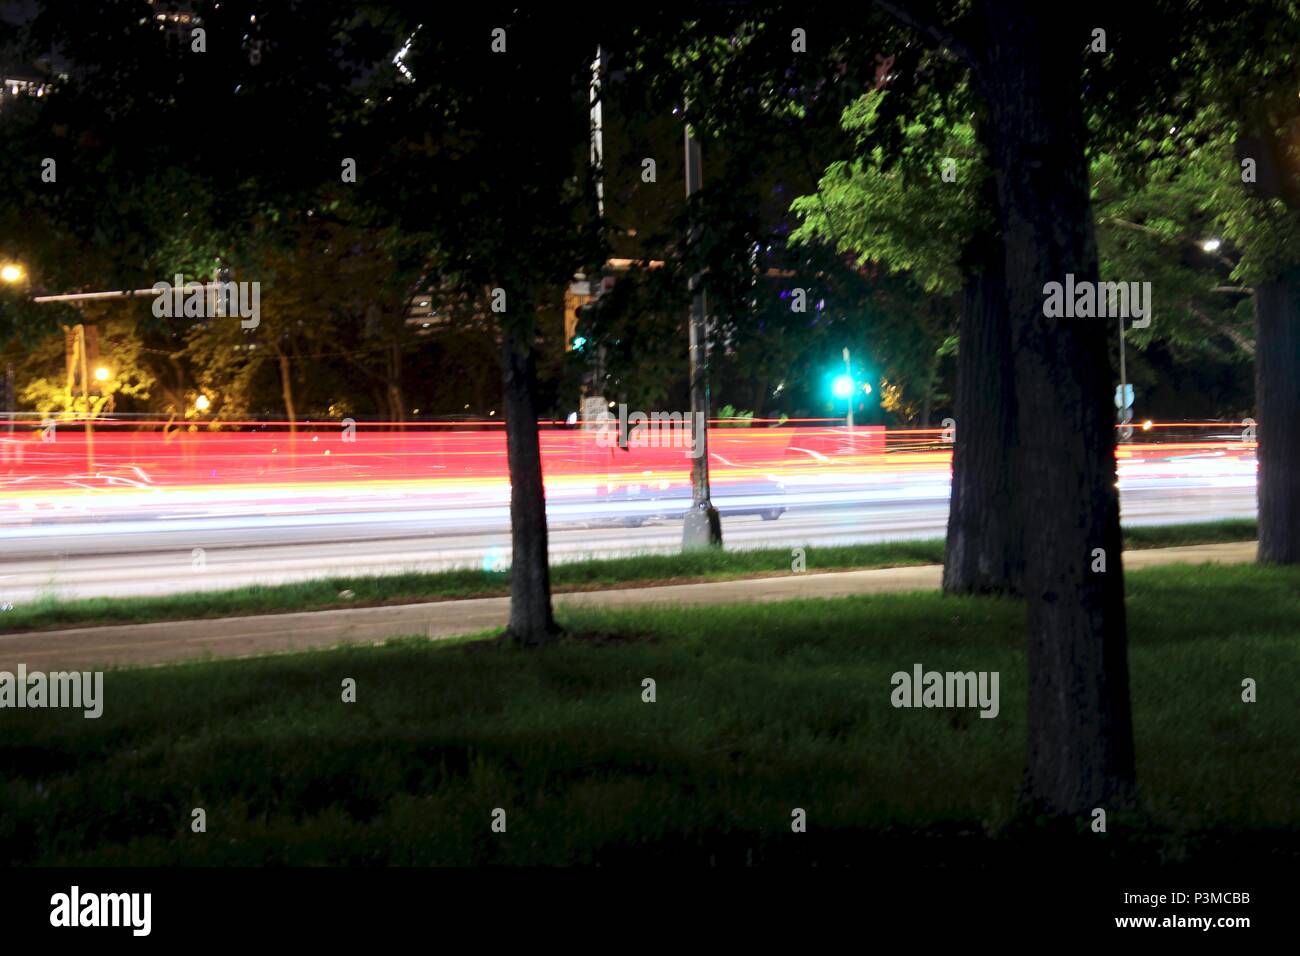 Blurred car lights between trees on a busy city street. Stock Photo